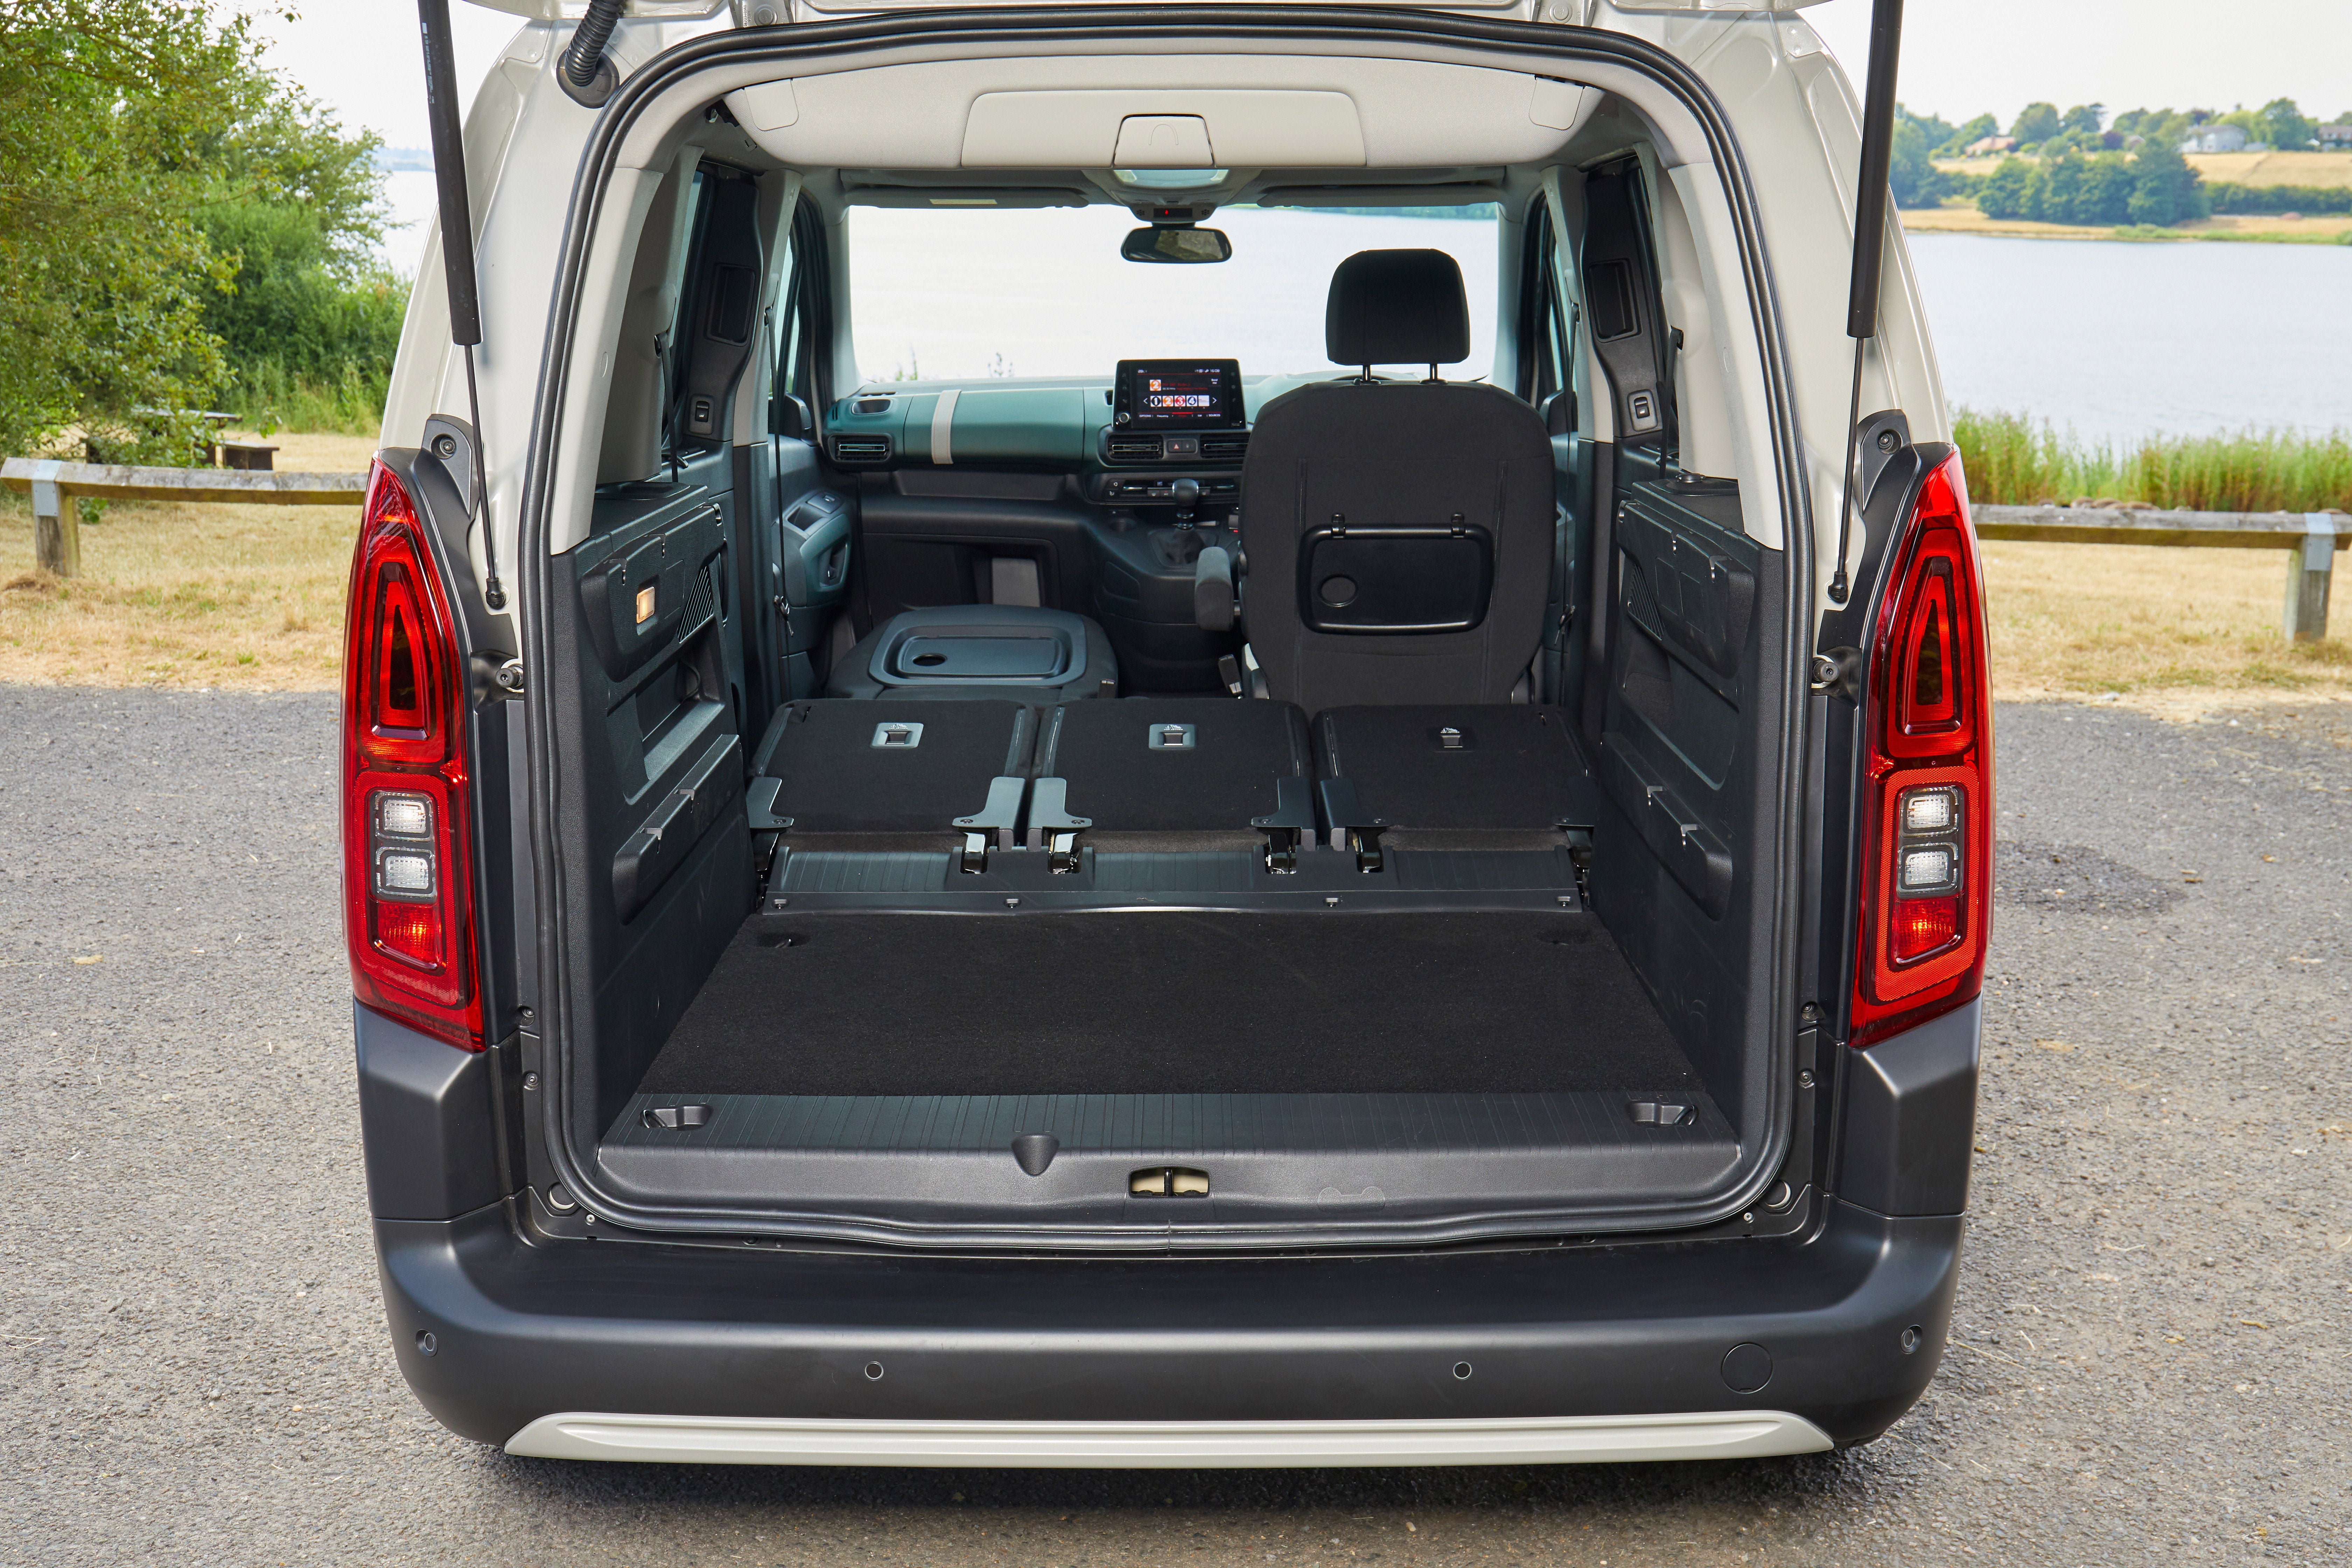 Peugeot Rifter review: A tall, boxy Tonka toy car with lots of storage, The Independent